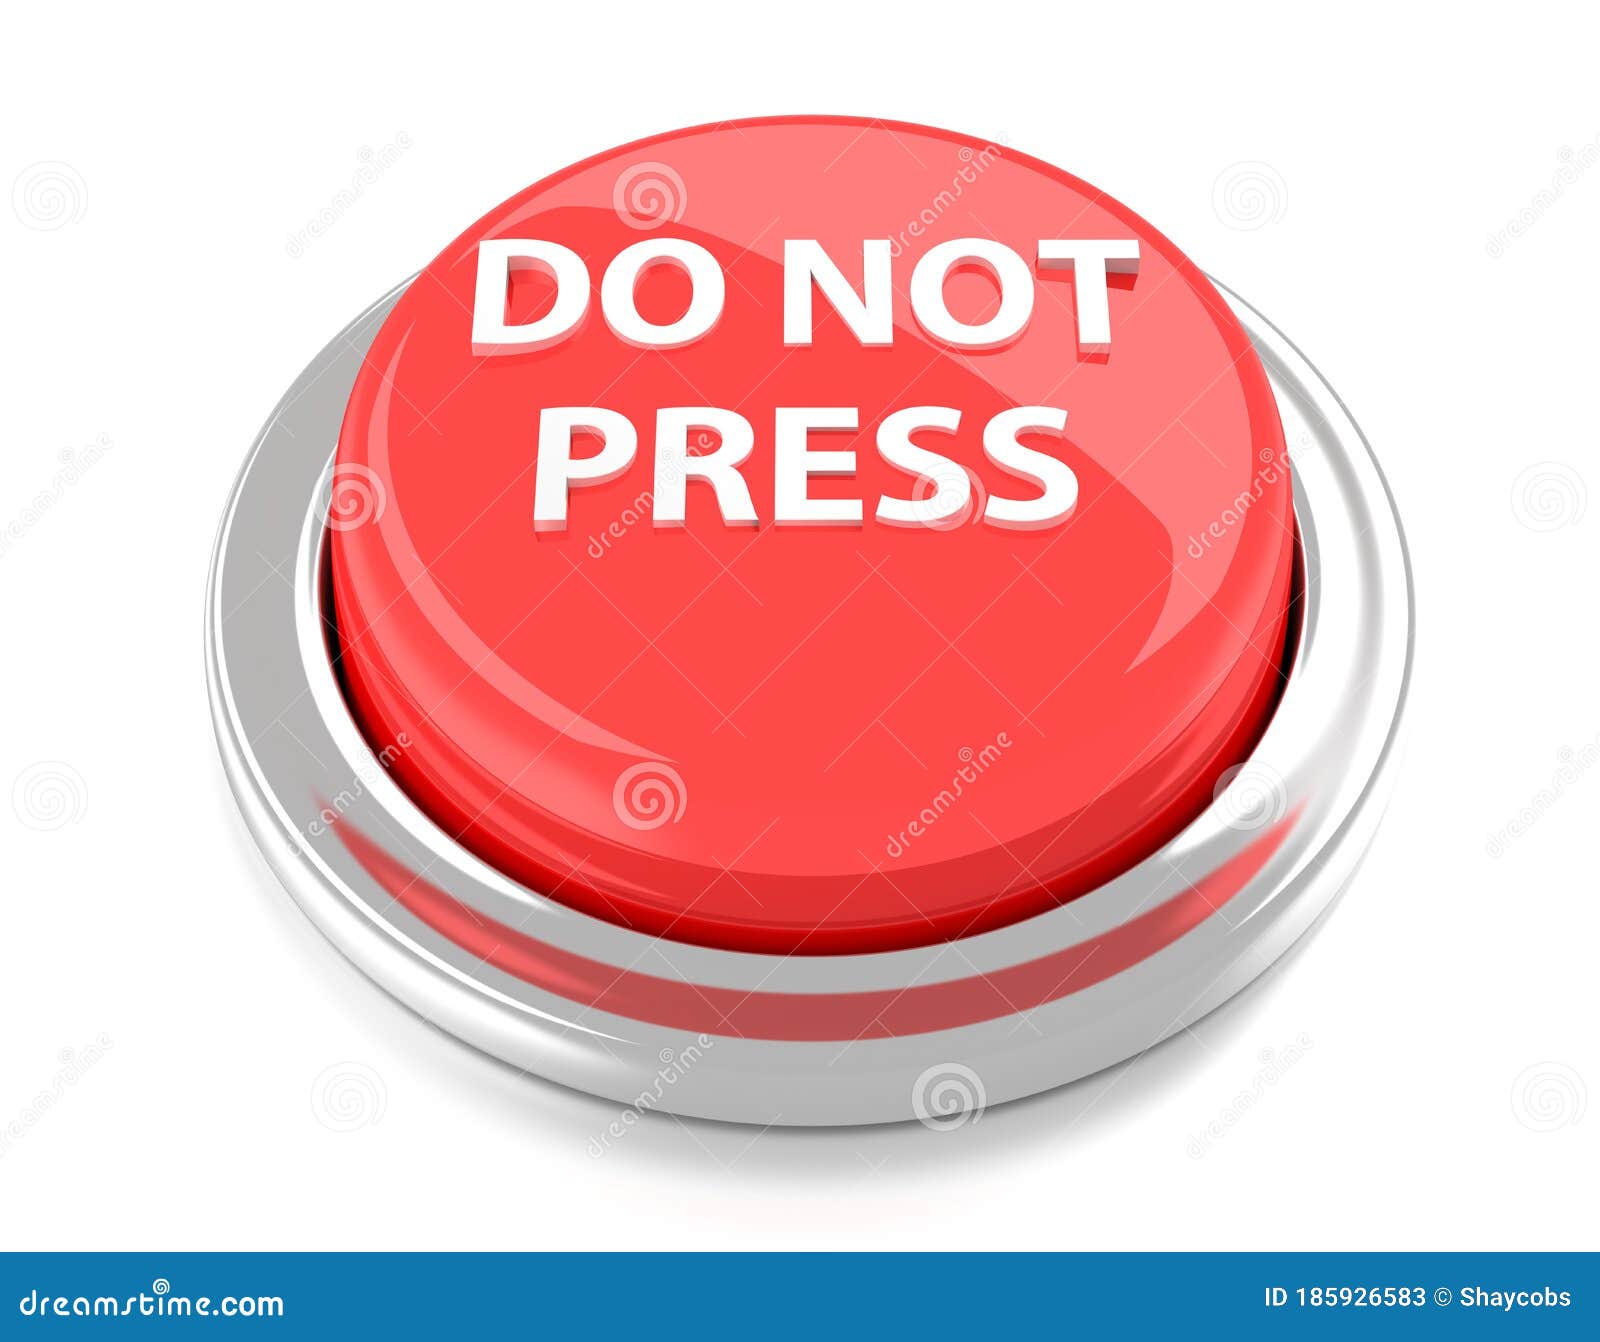 Do Not Press On Red Push Button 3d Illustration Isolated Background Stock Illustration Illustration Of Button Round